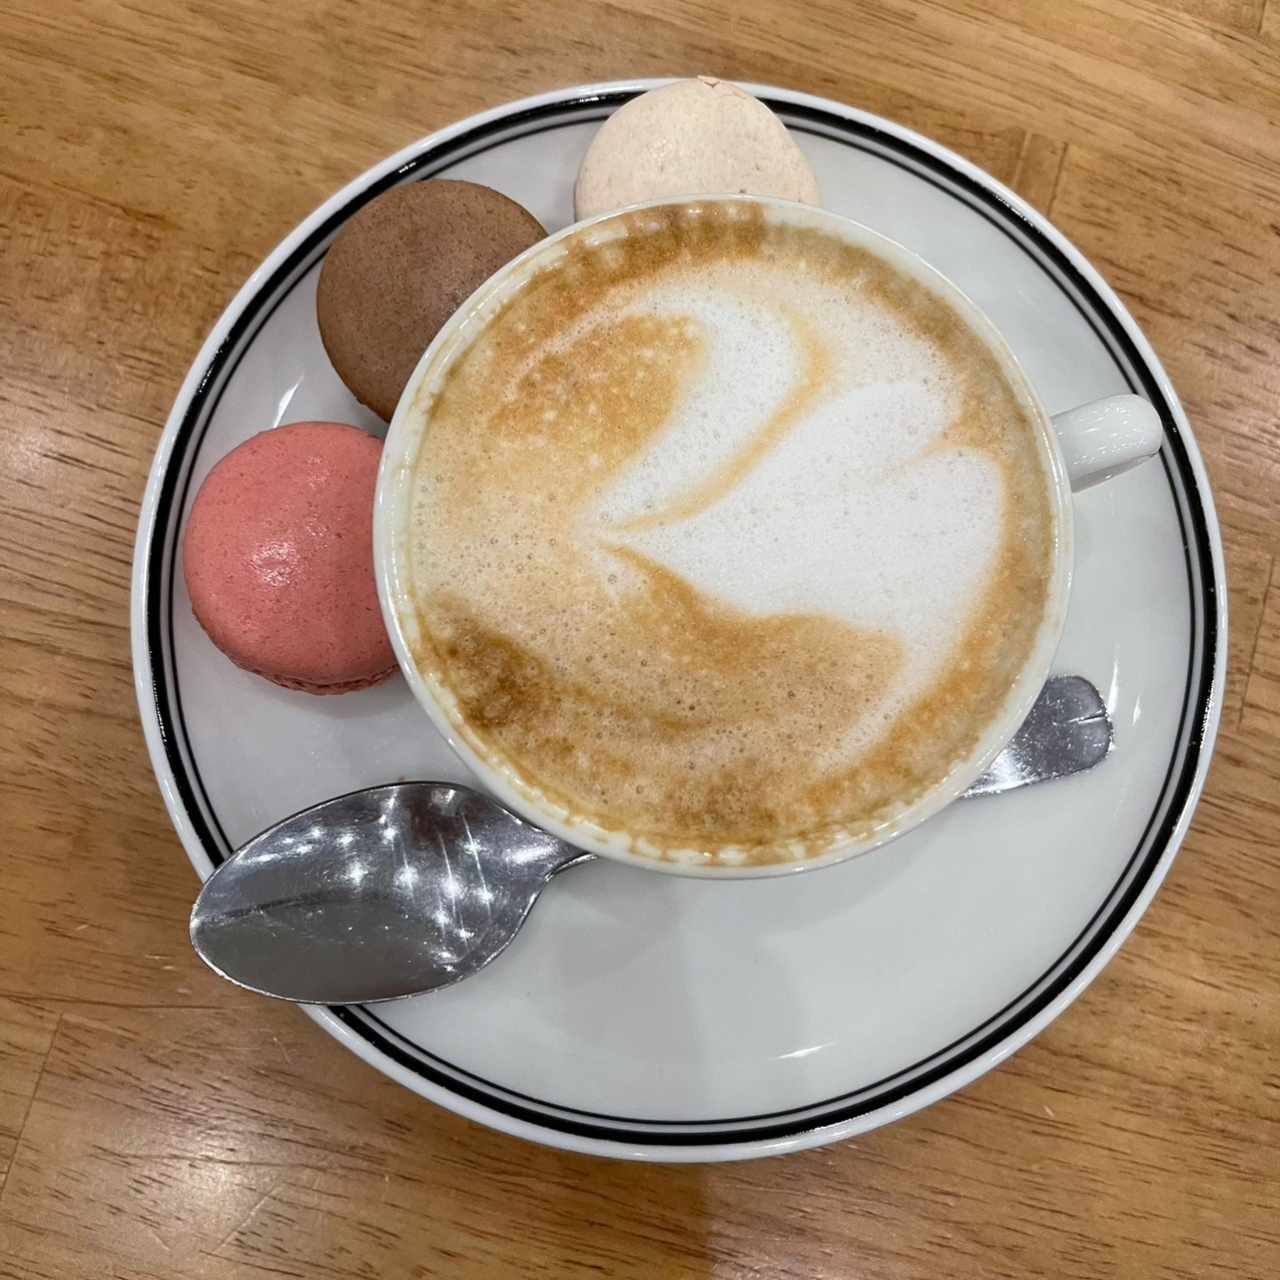 Capuccino + 3 macaroons 